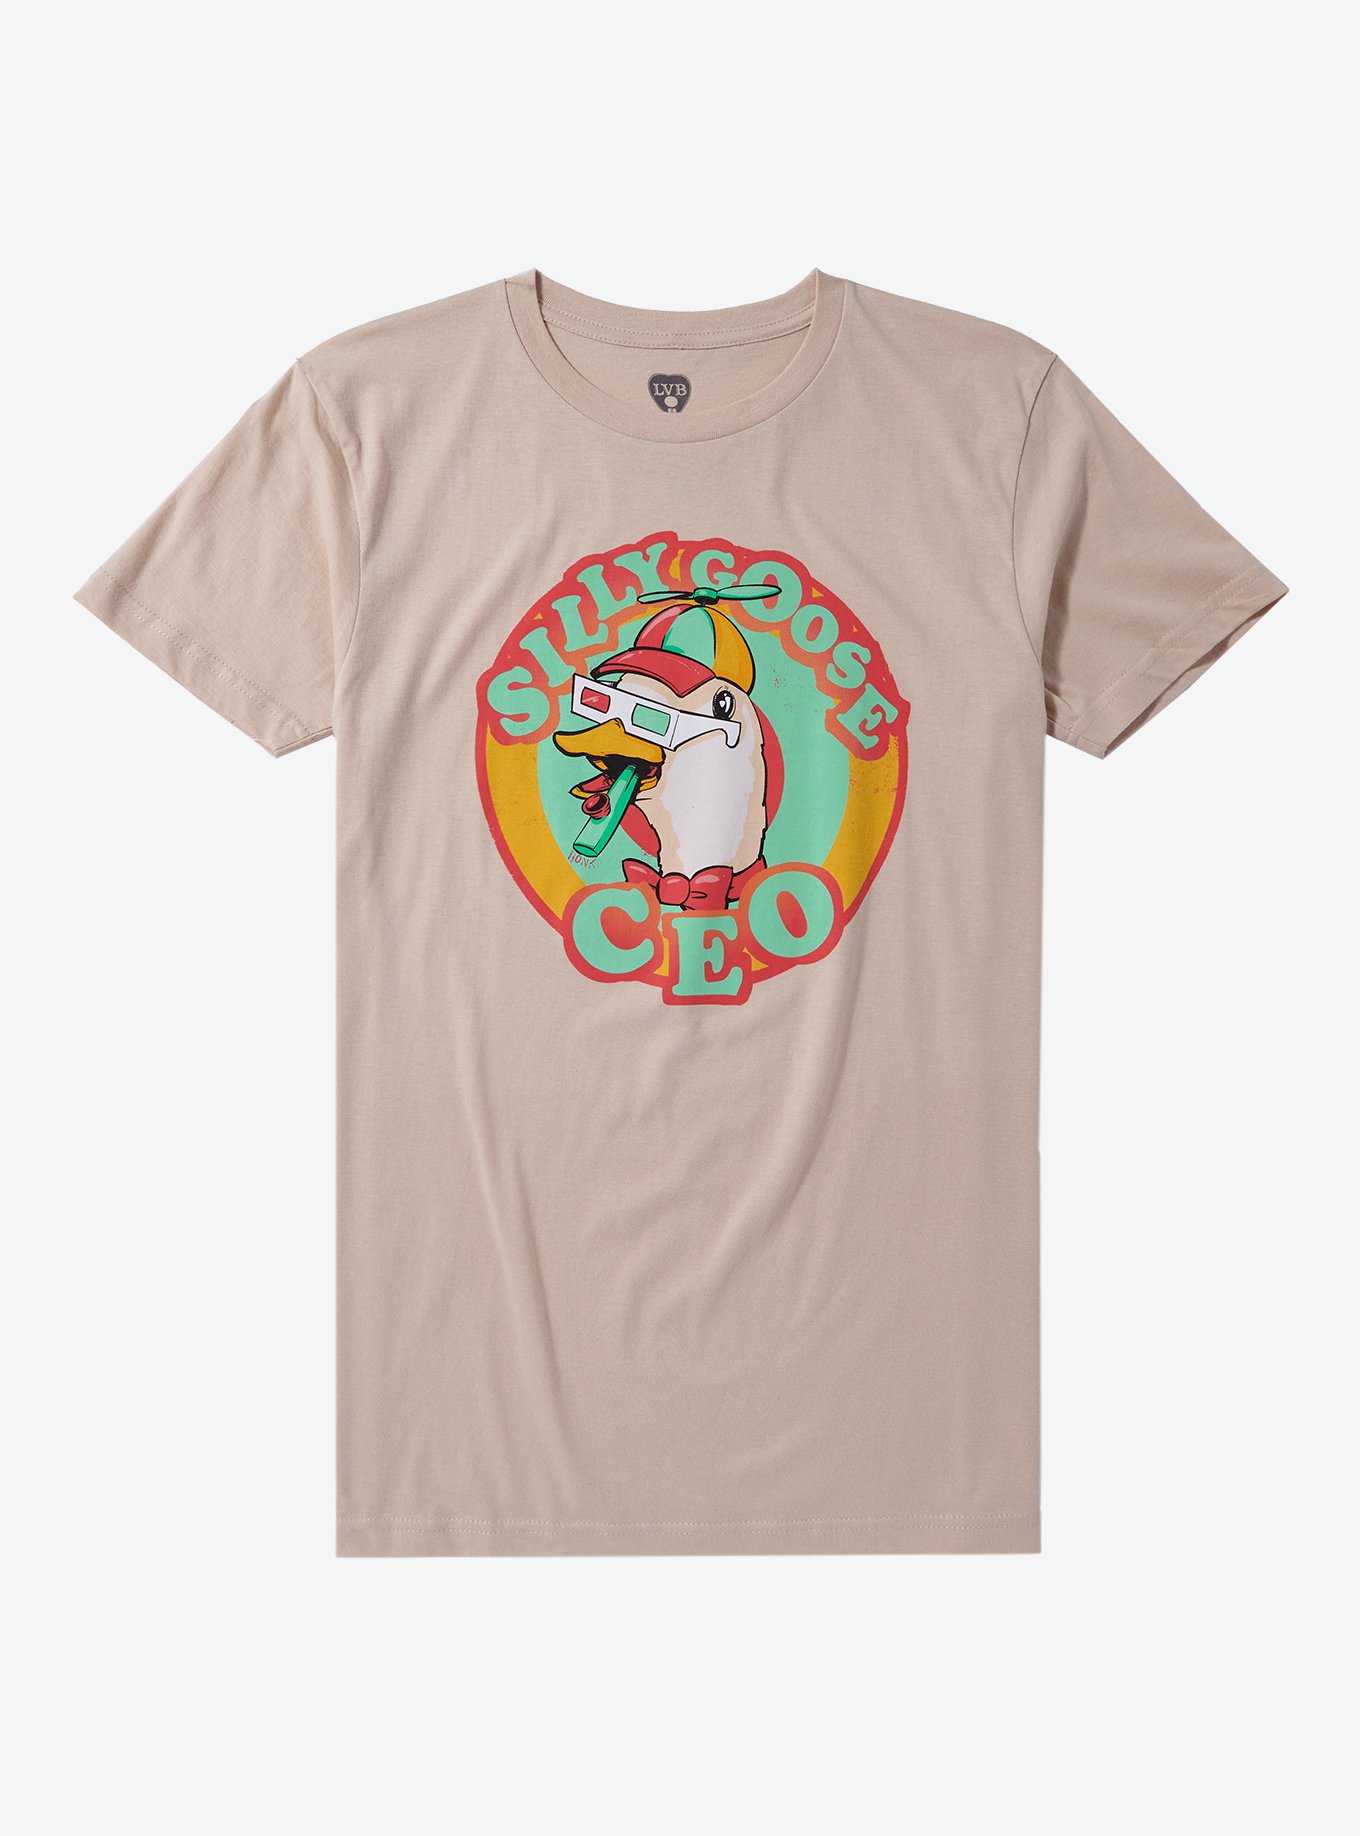 Silly Goose CEO T-Shirt By Ludwig Van Bacon Art, , hi-res